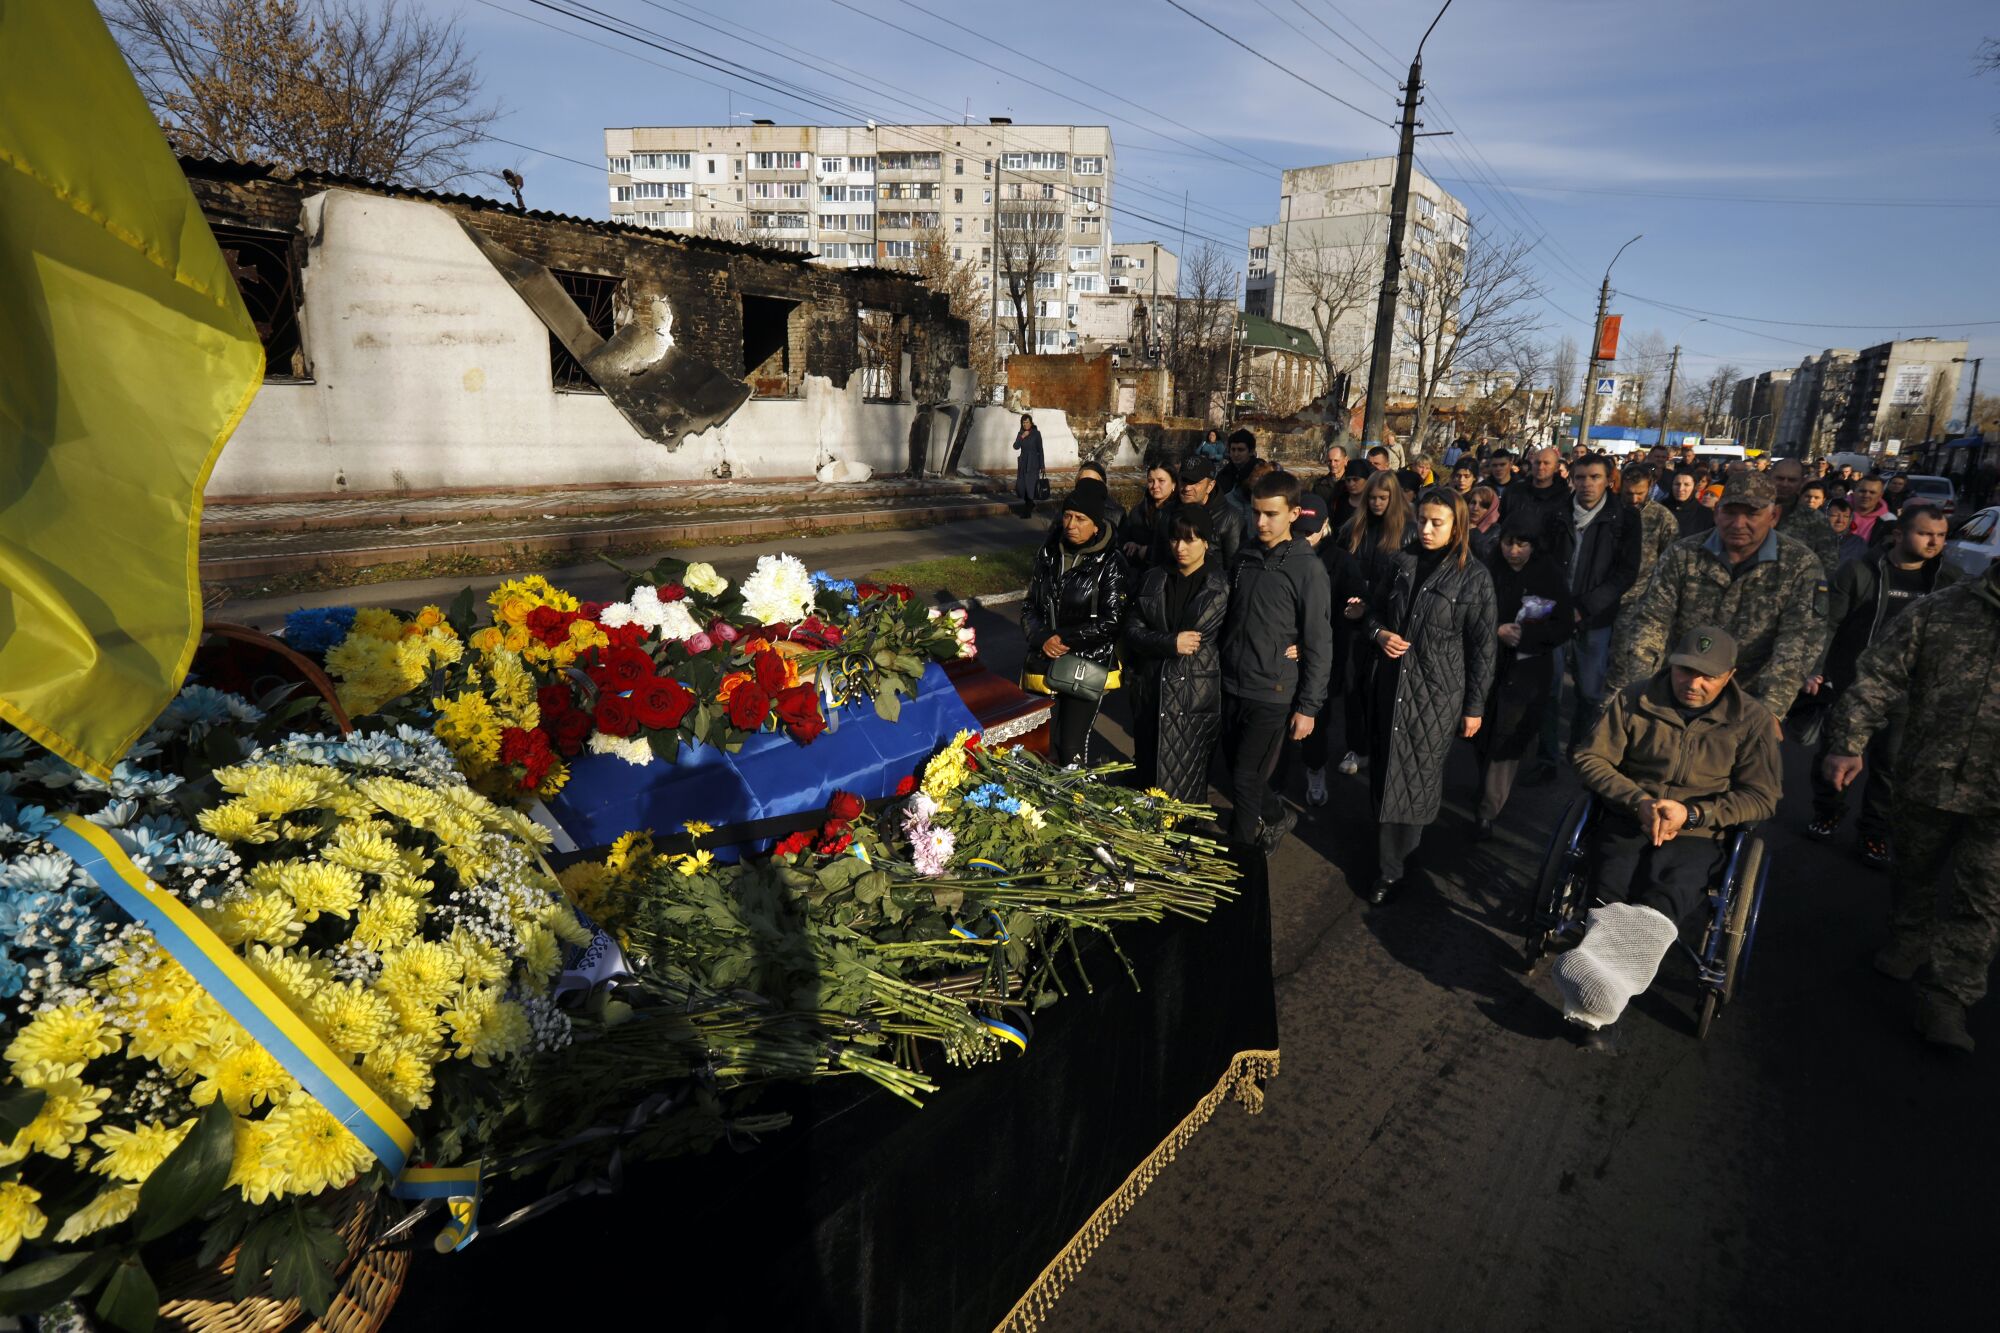 A group of people in dark clothes or military camouflage follow a flower-covered casket on a city street